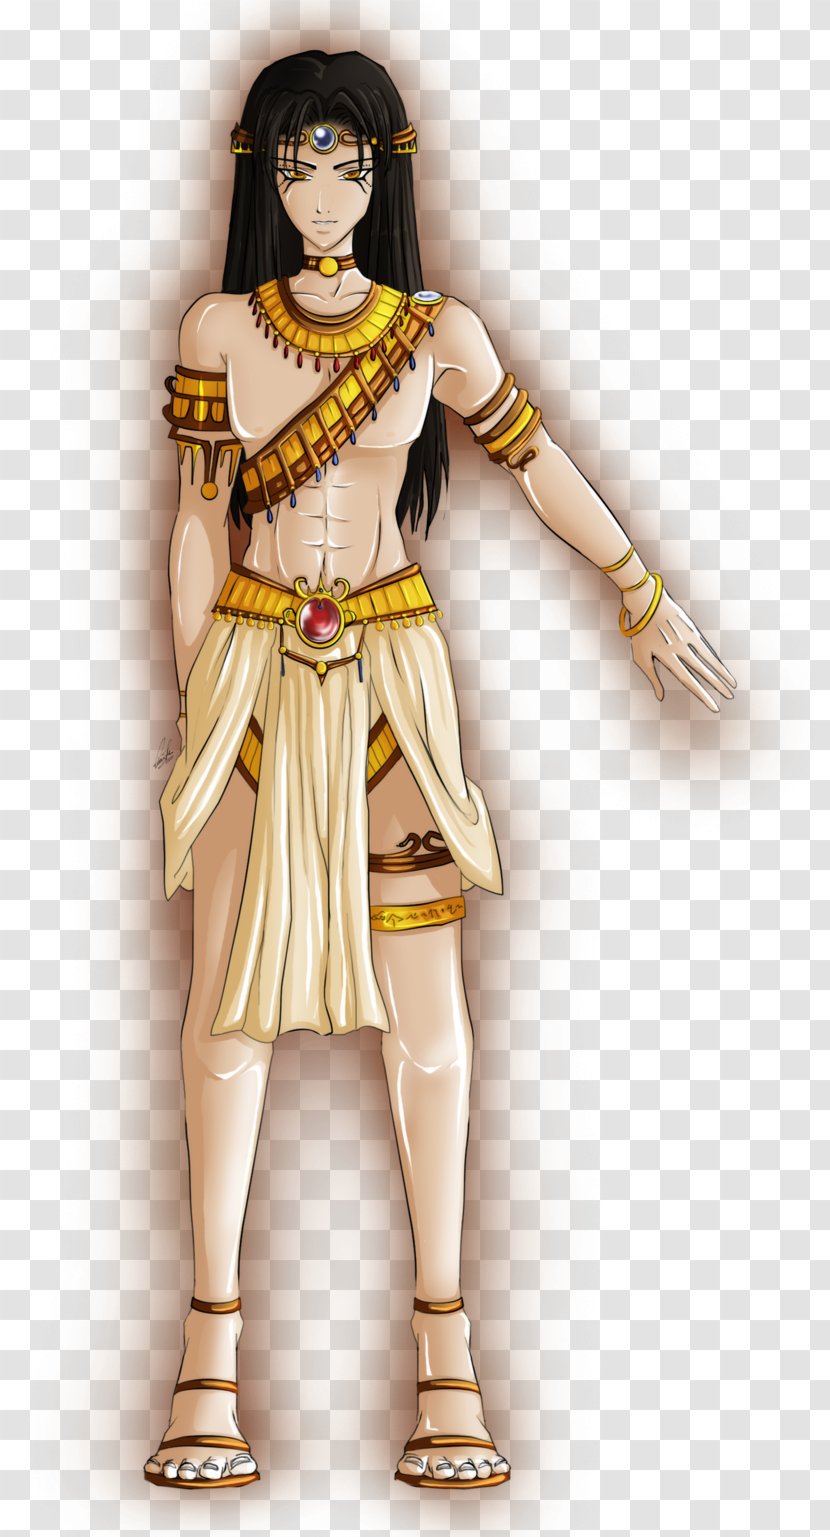 Ancient Egyptian royalty in FateGrand Order  Journal of Geek Studies